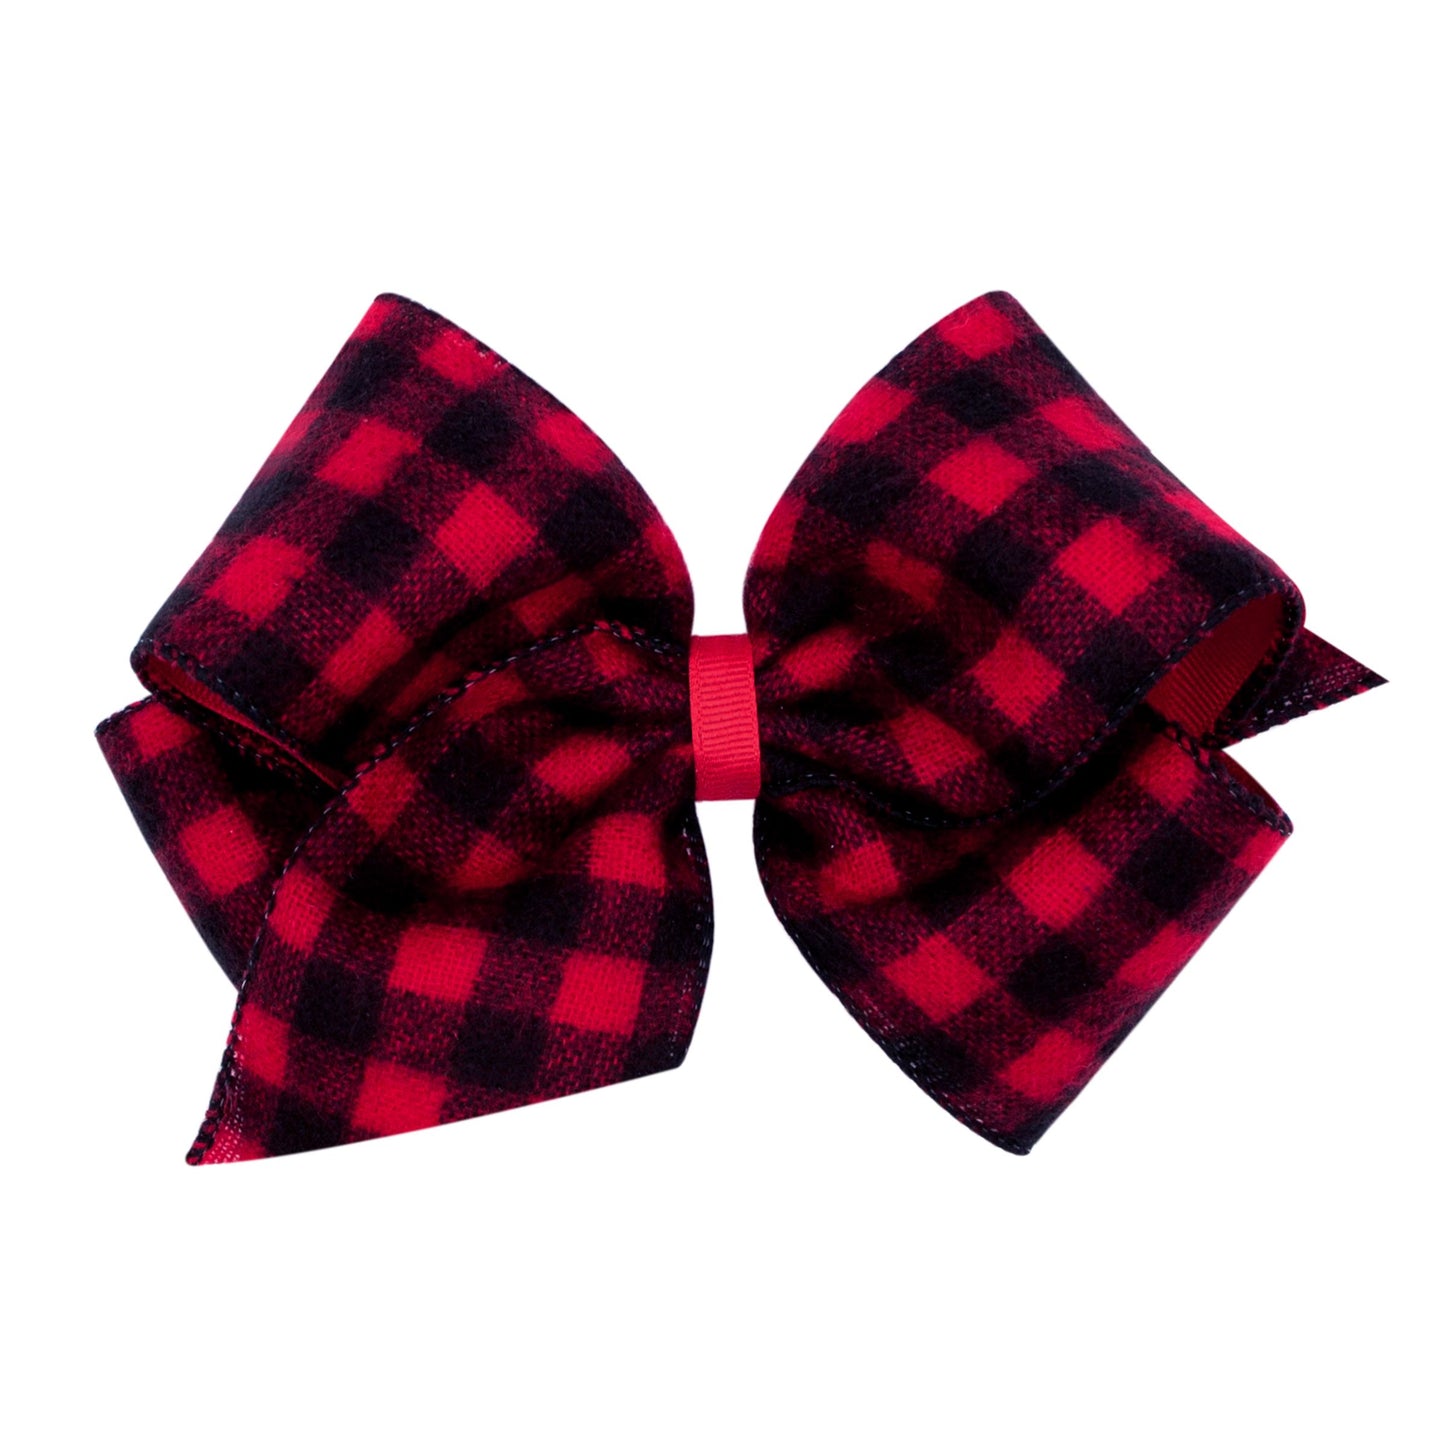 Wee Ones - Flannel Buffalo Check Overlay Bow